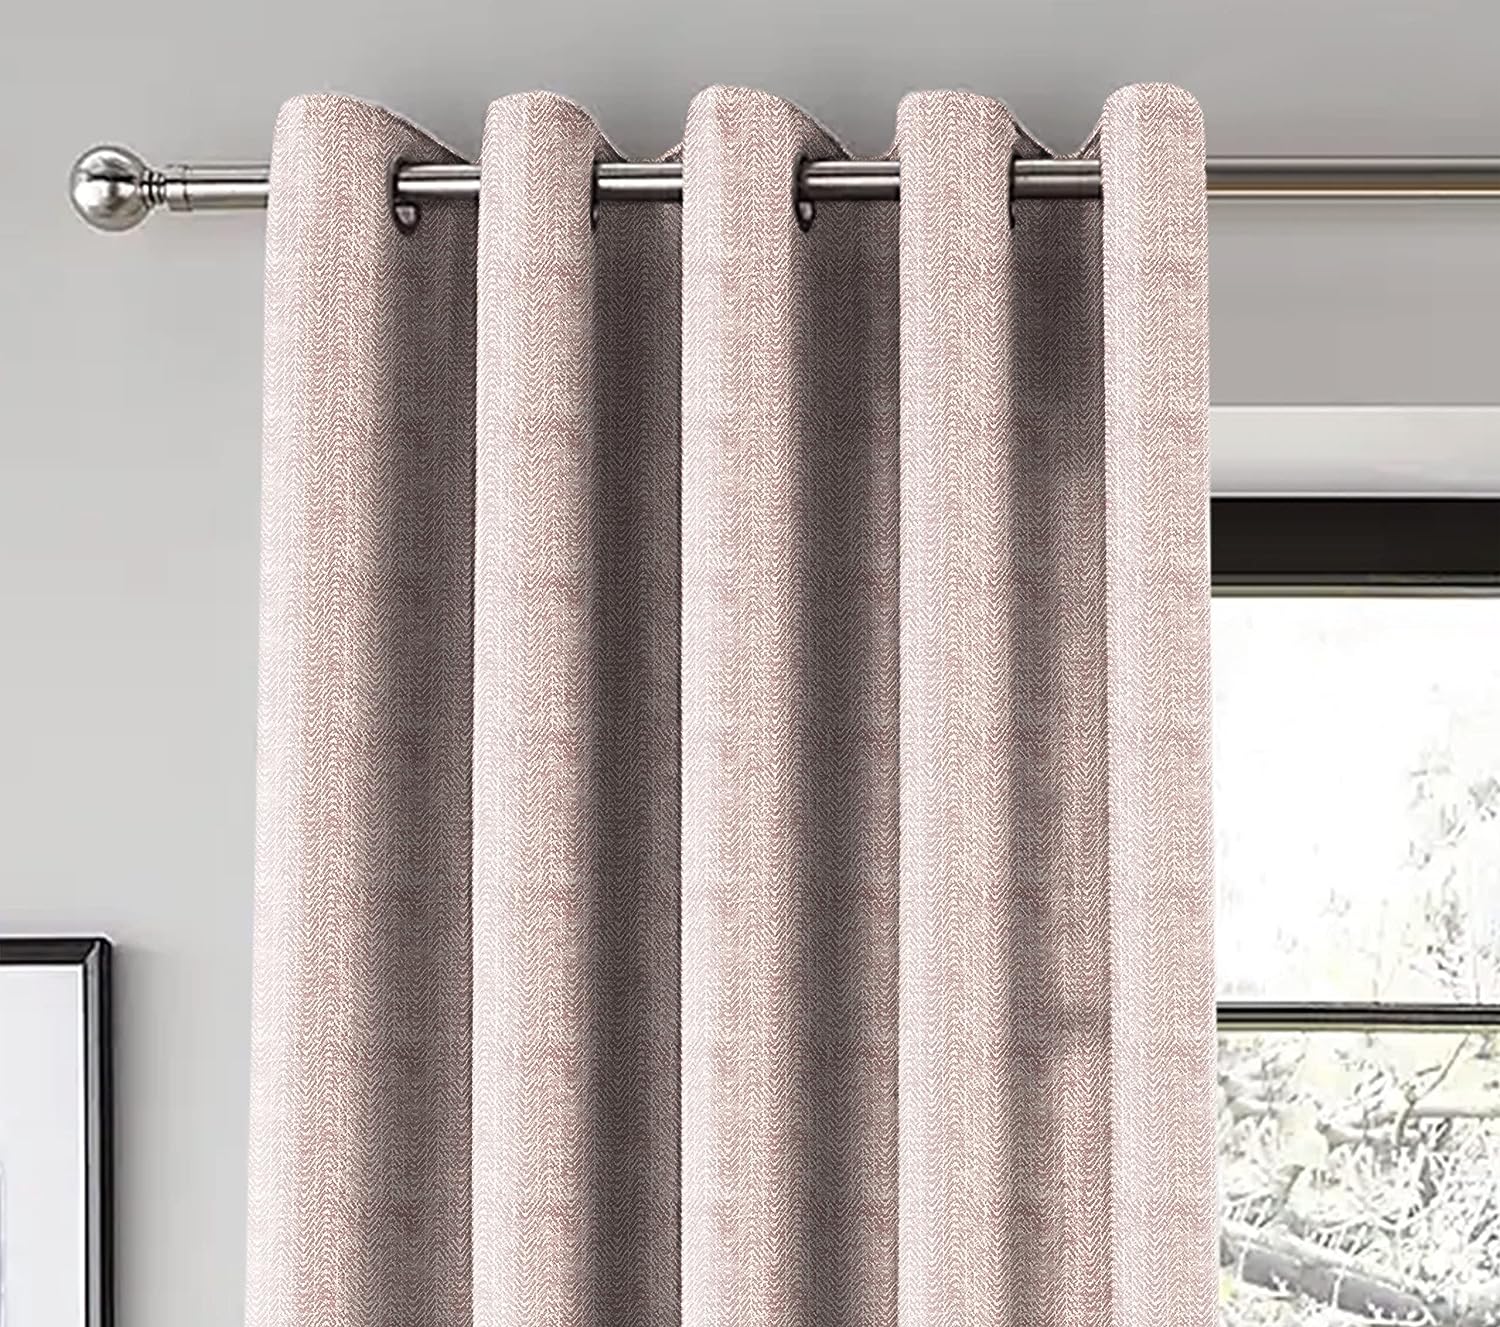 TURIN BABY PINK BLACKOUT CURTAIN